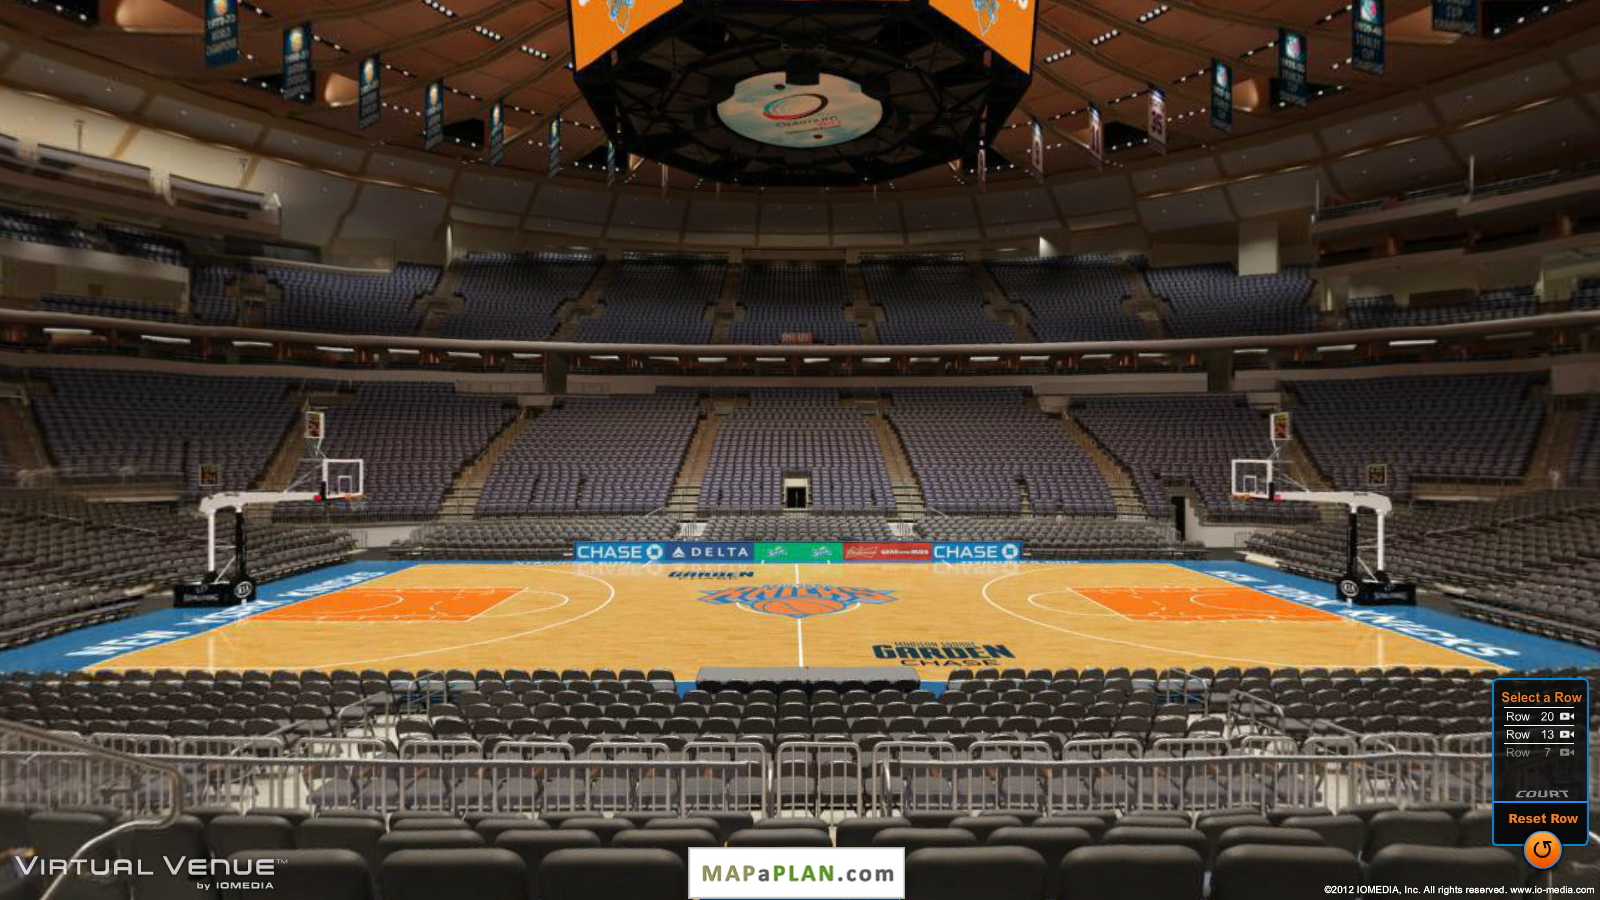 Madison square garden seating chart View from section 117